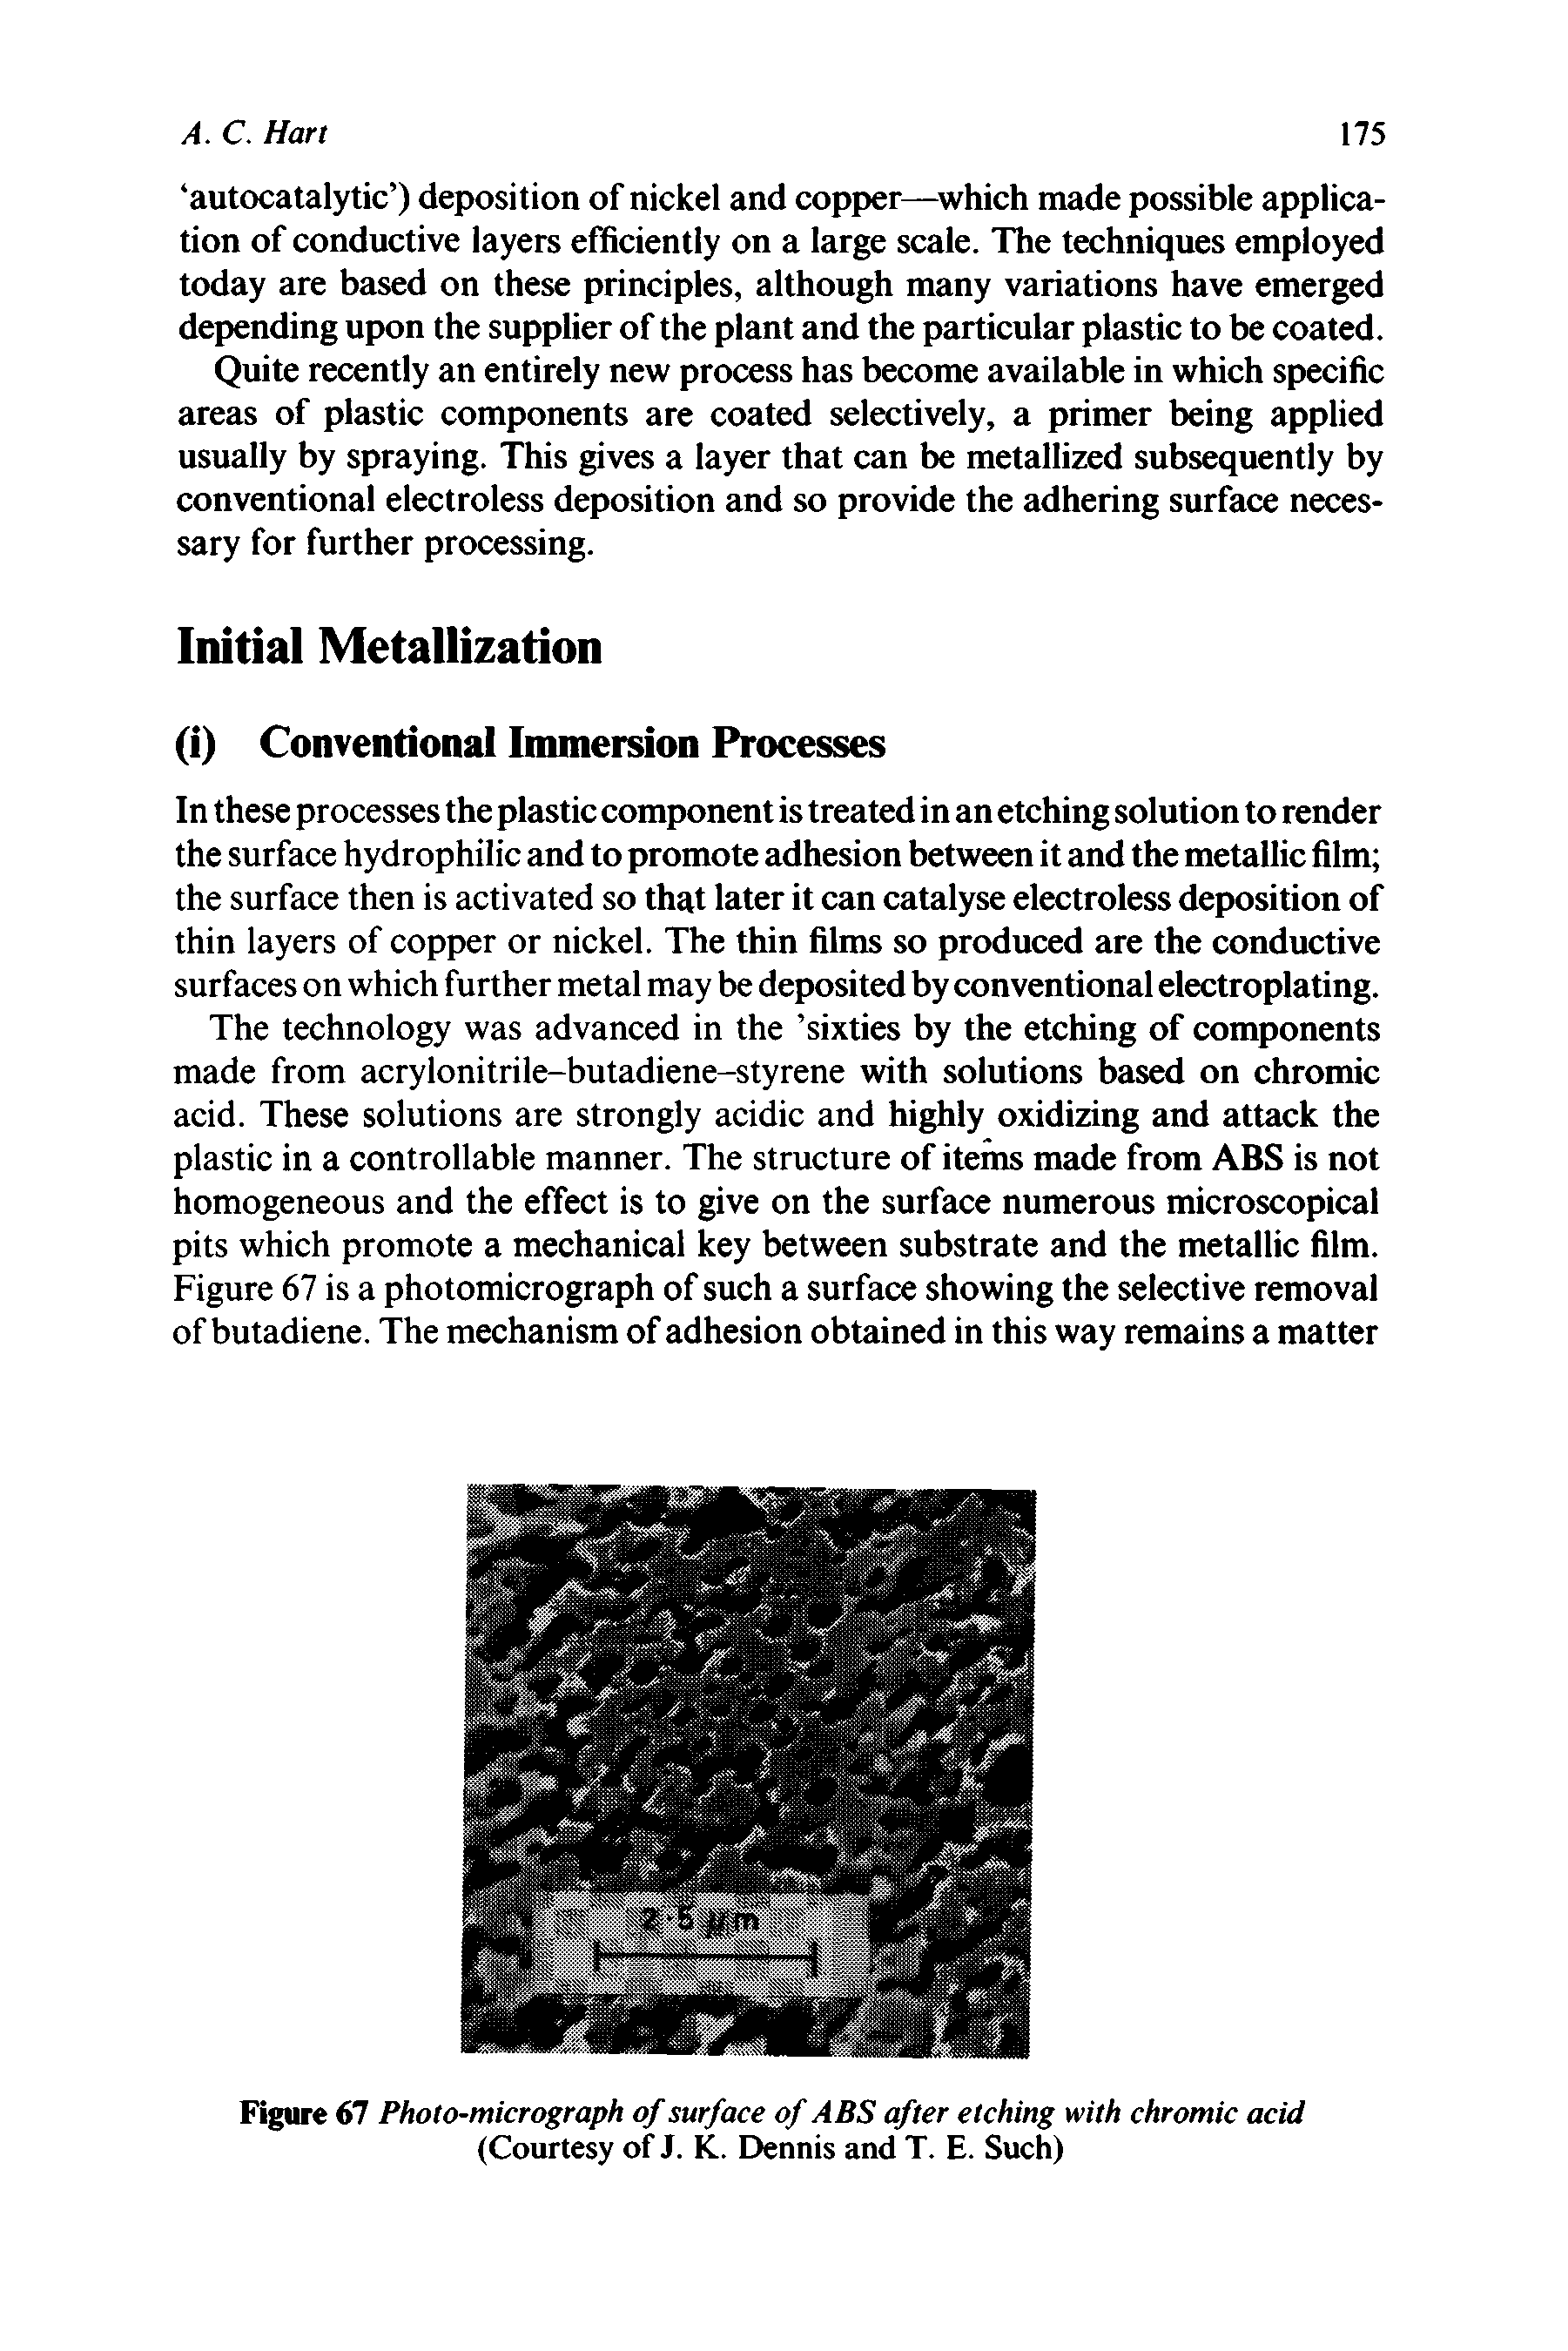 Figure 67 Photo-micrograph of surface of ABS after etching with chromic acid (Courtesy of J. K. Dennis and T. E. Such)...